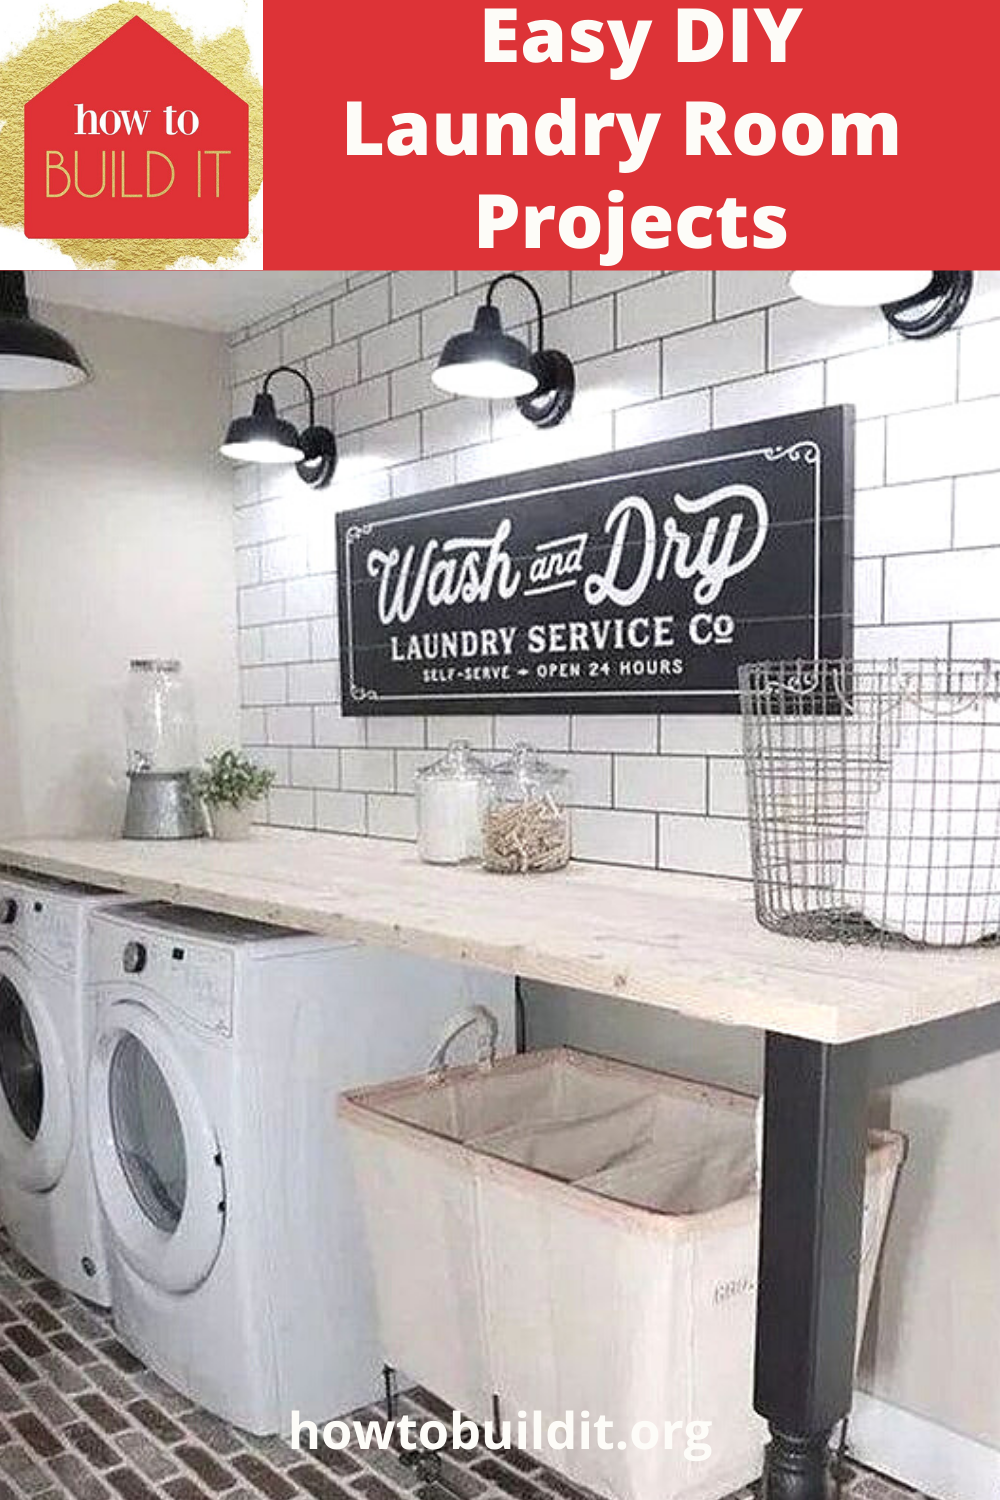 Make your laundry room a place you love so much, that doing laundry doesn't feel like a chore. It's easy to do with any one of these DIy laundry room projects. Ideas for budget projects, weekend projects and more. Keep on reading. #Laundryroomdecor #beautifullaundryrooms #diyhomeimprovementprojects #homeupgrades #howtobuilditblog